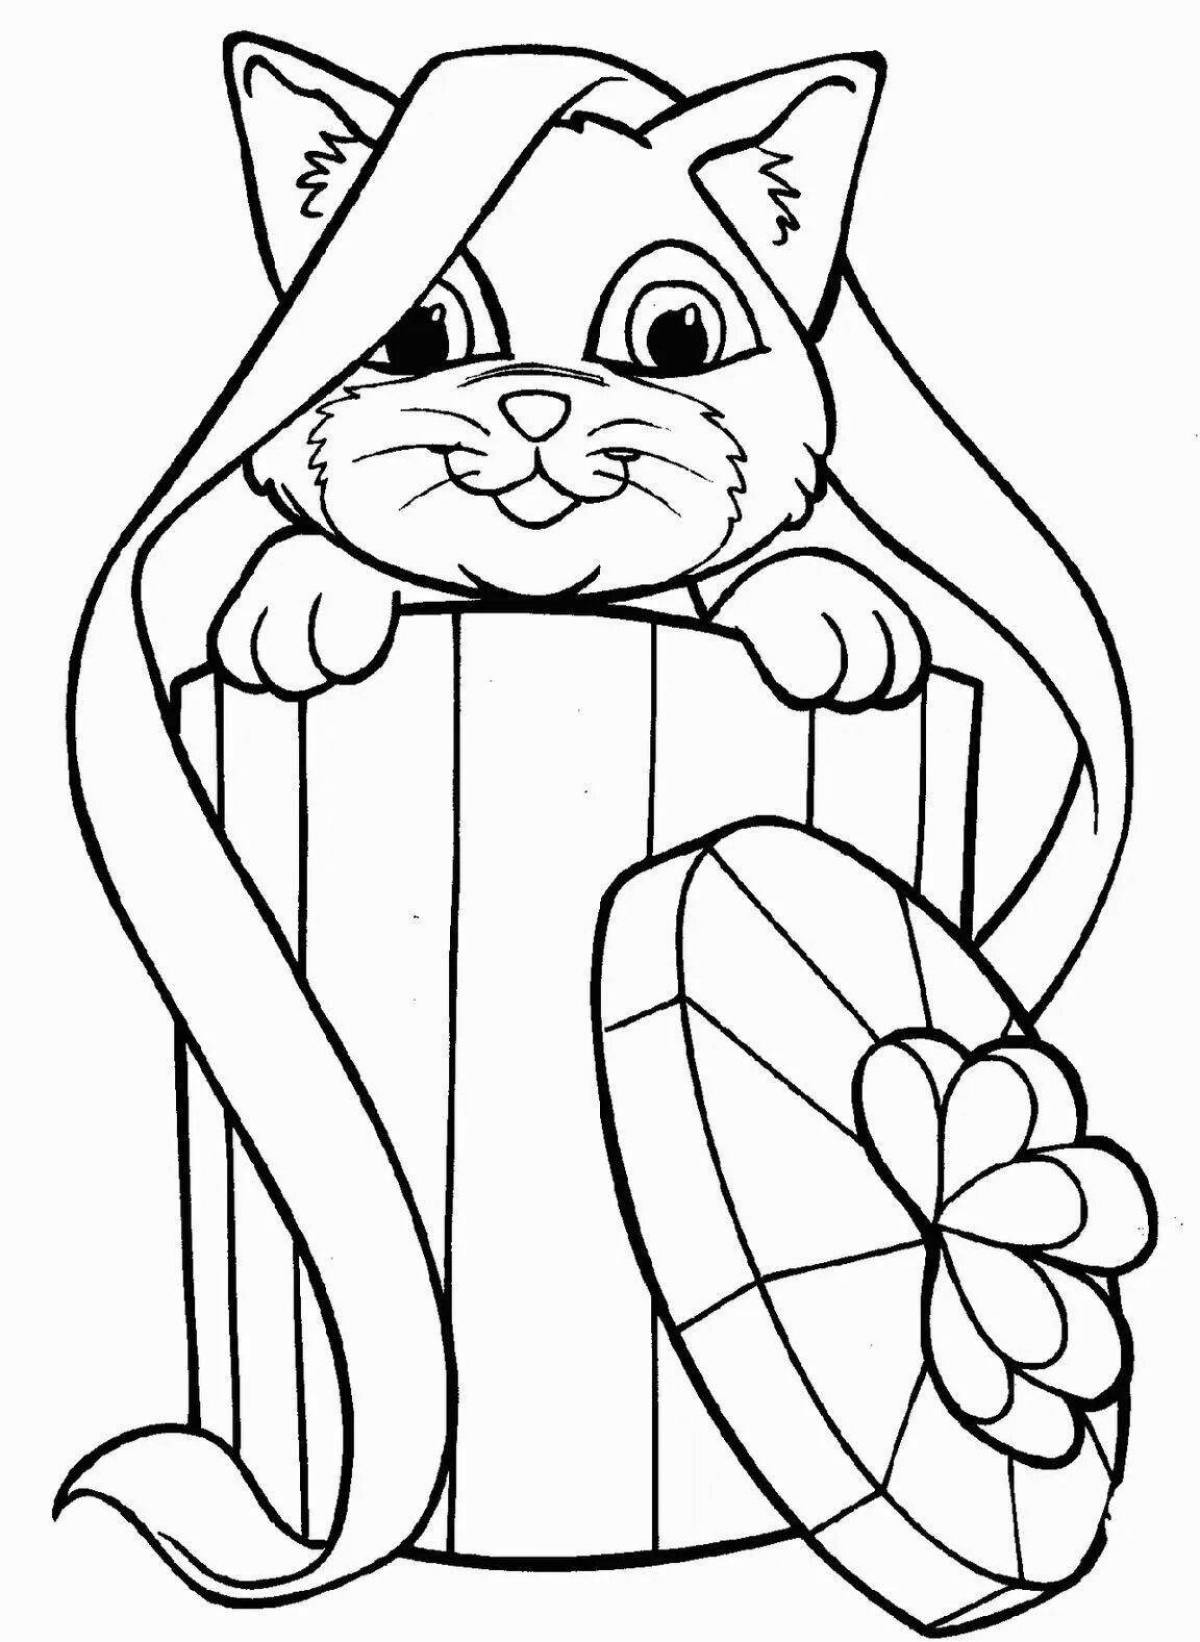 Colorful cat coloring page